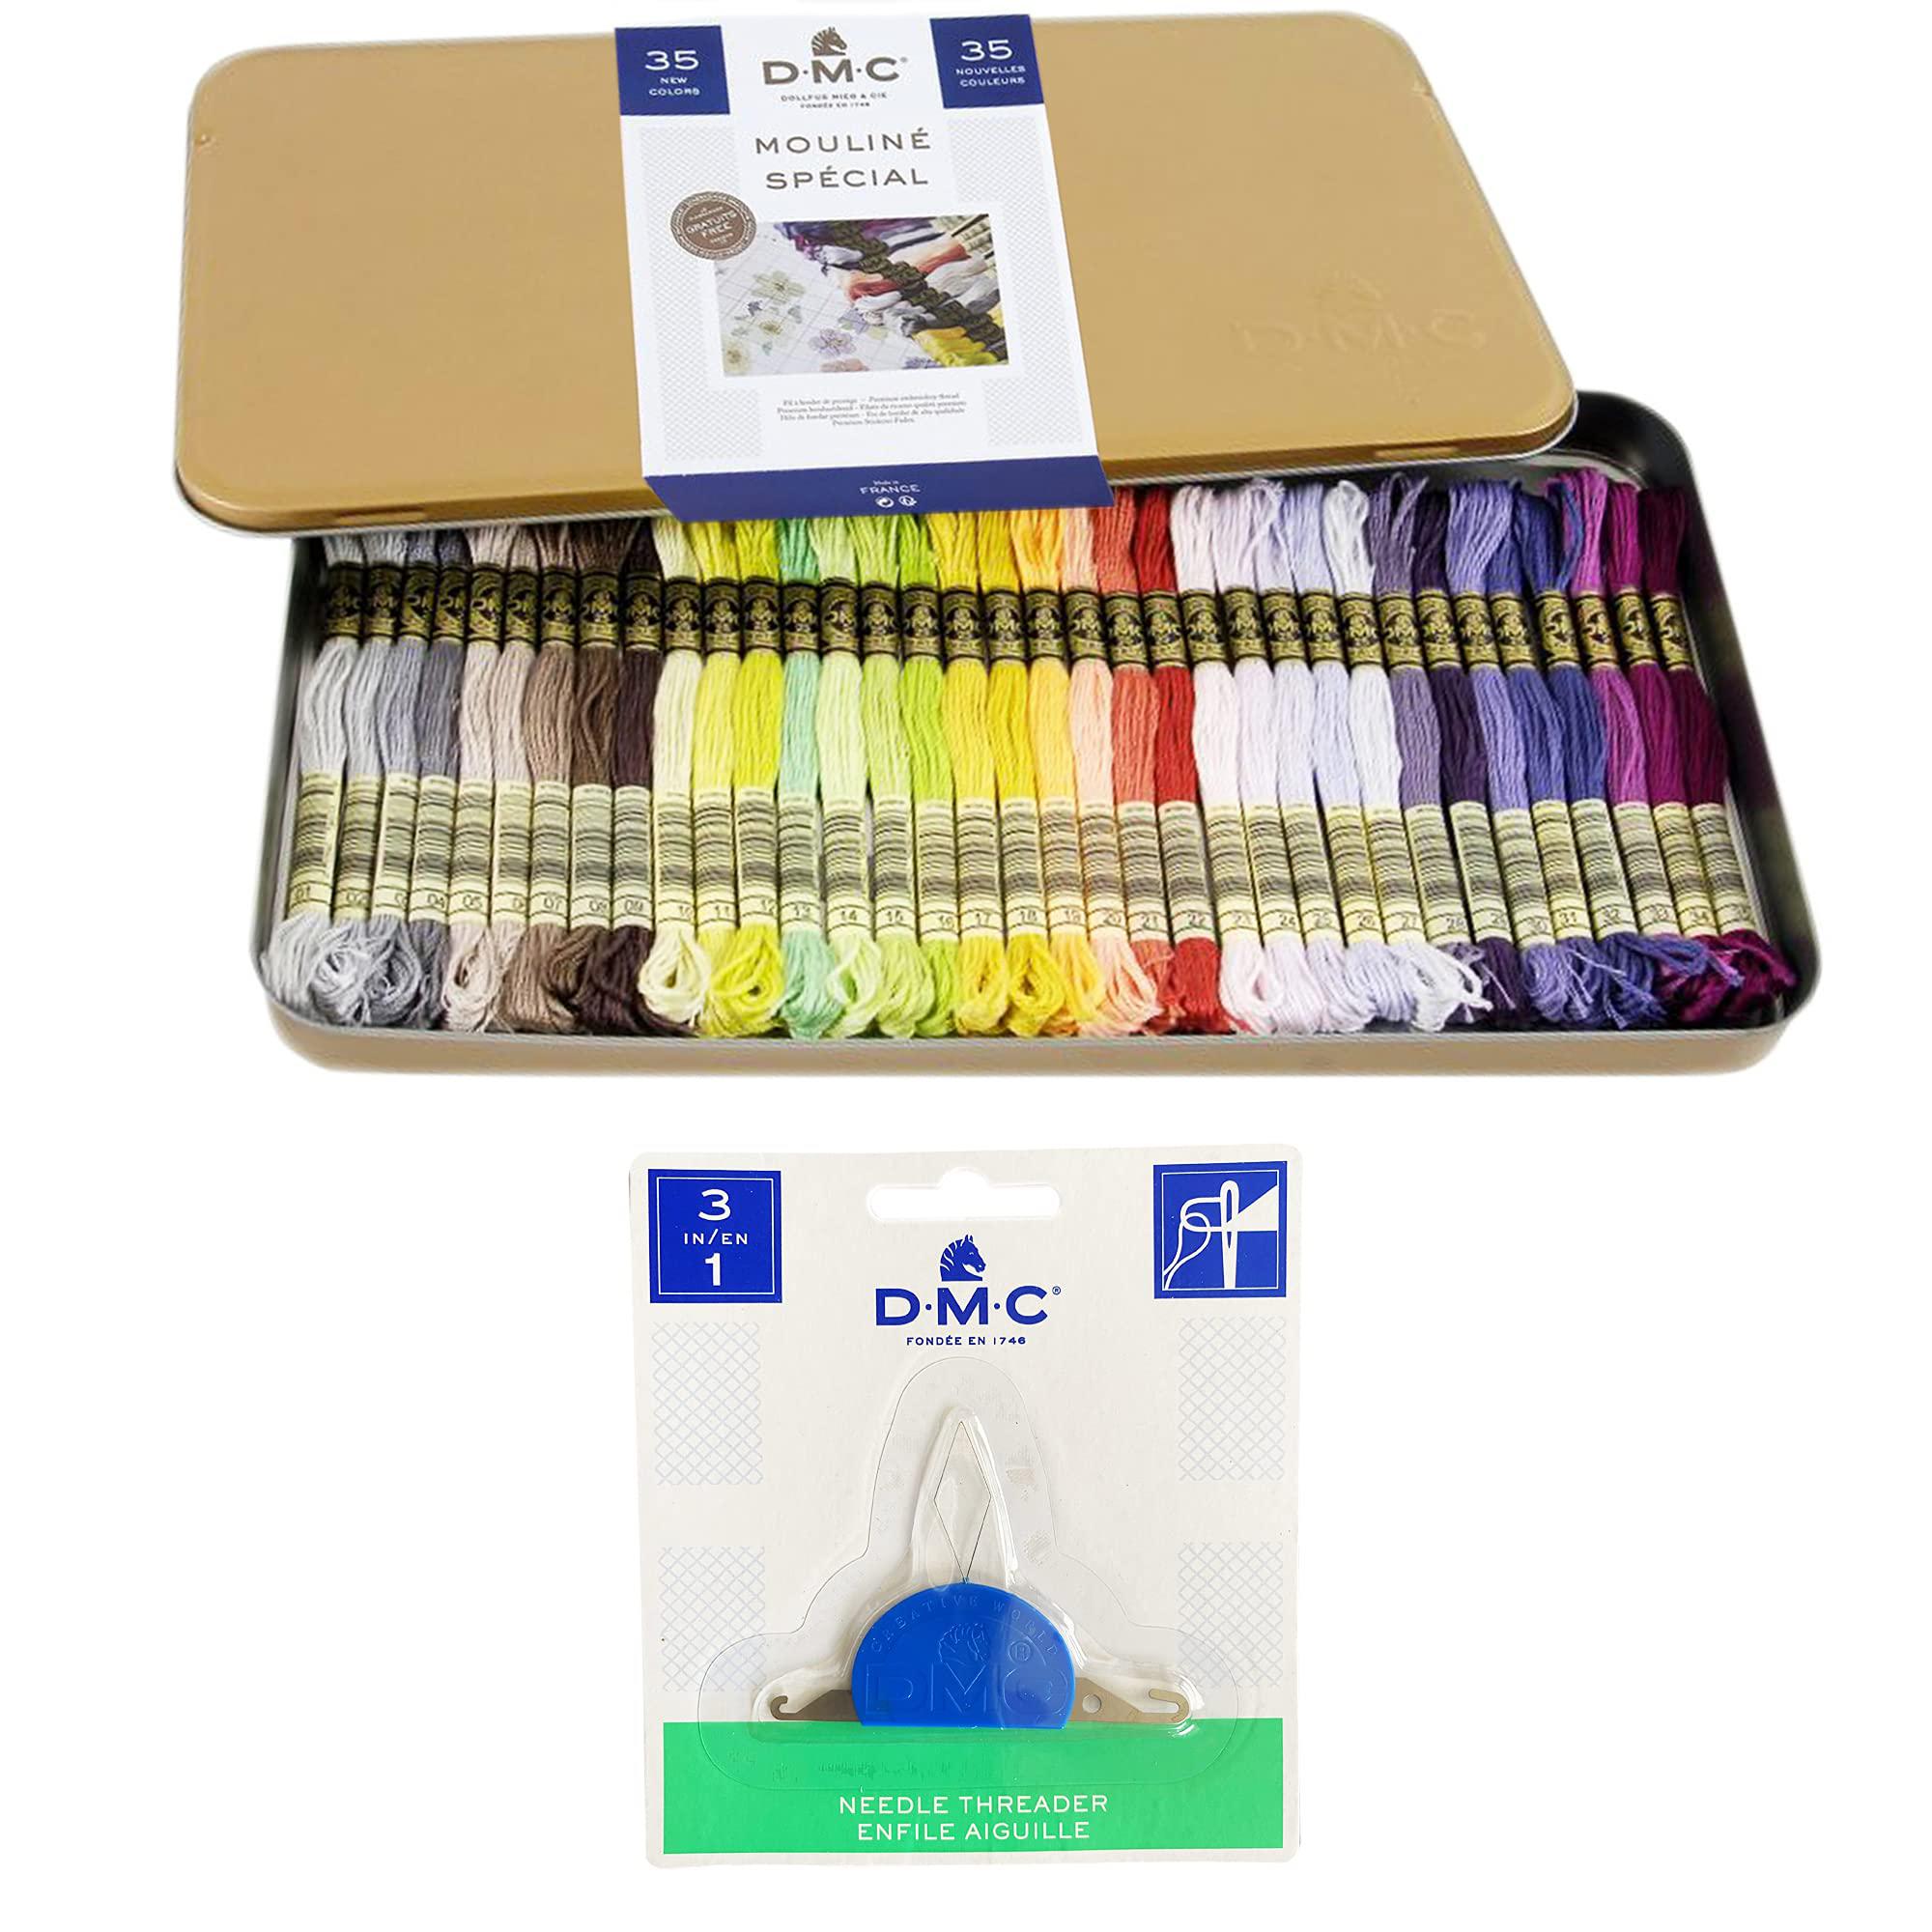 Charming Melodie dmc embroidery floss pack,35 colors assortment with  collector tin,dmc embroidery thread kit bundle with dmc needle threader.